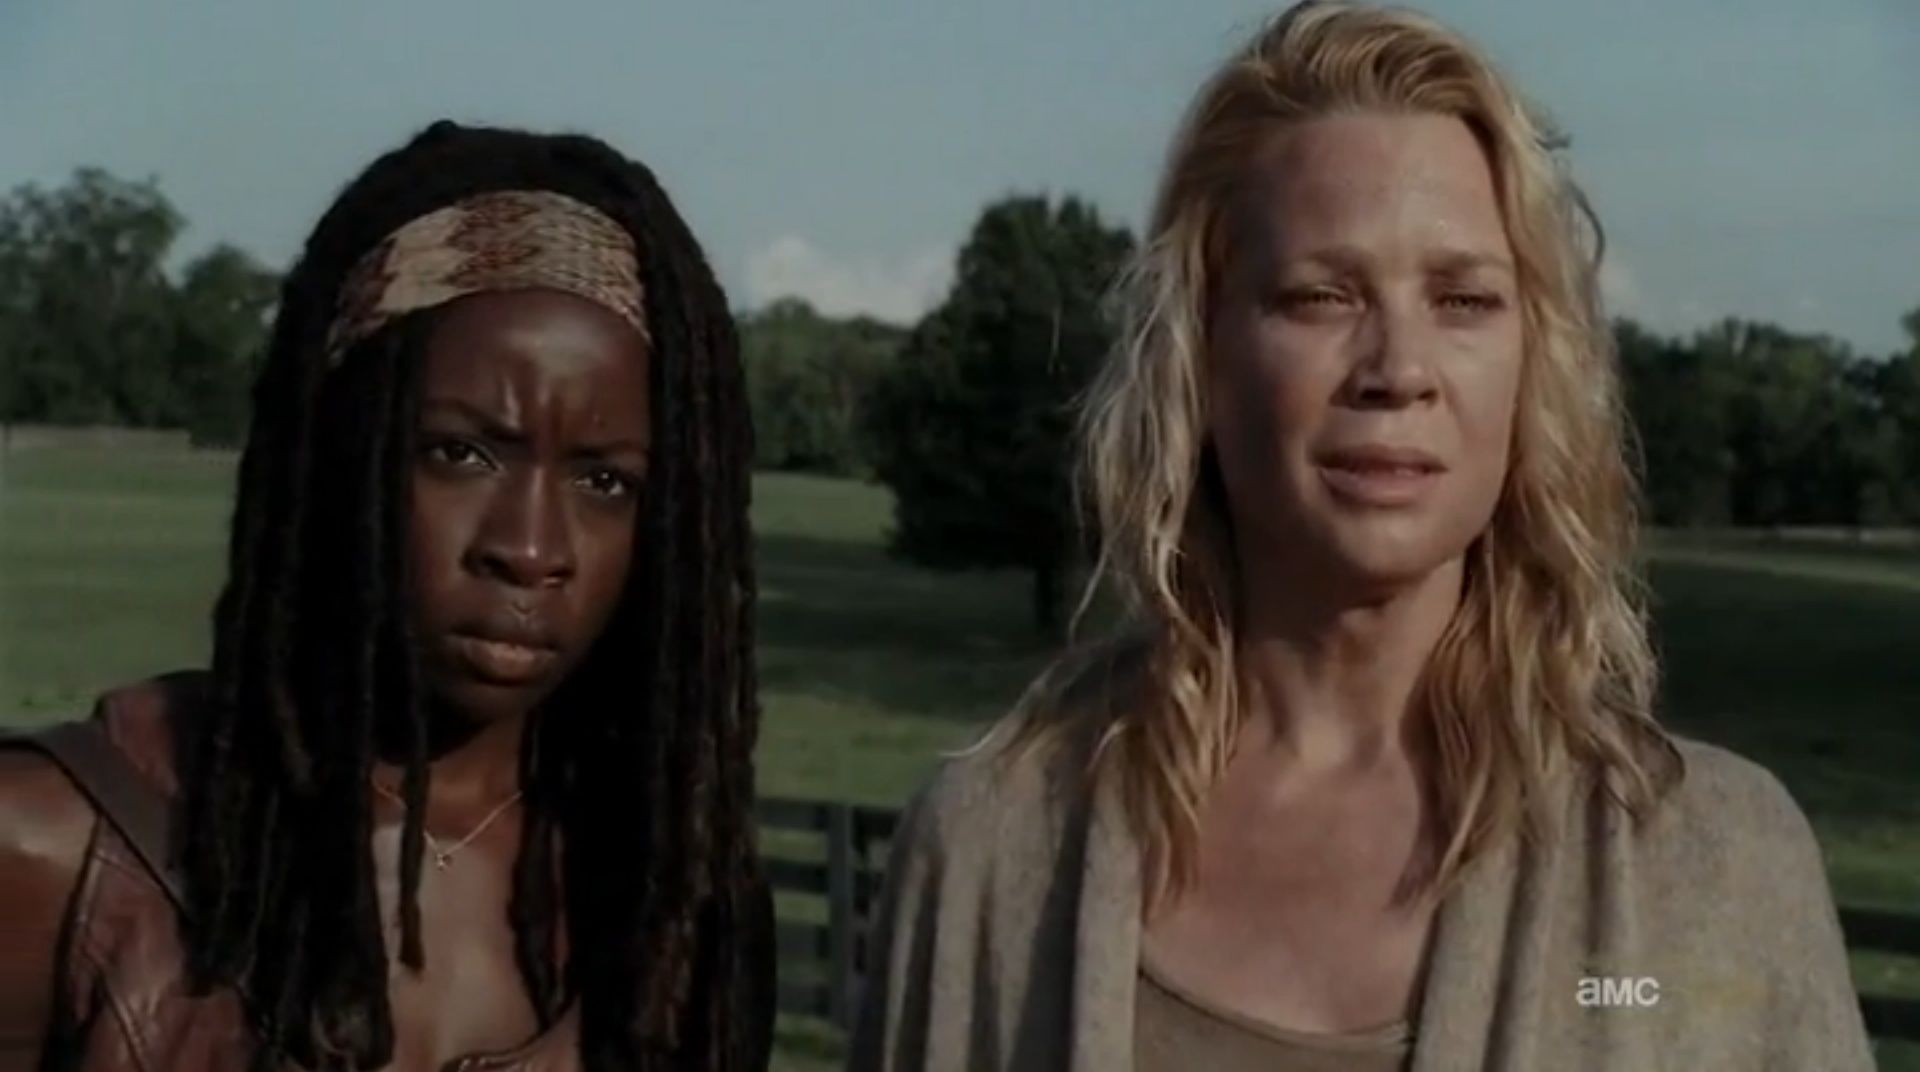 Michonne (Danai Gurira) and Andrea (Laurie Holden) in The Walking Dead